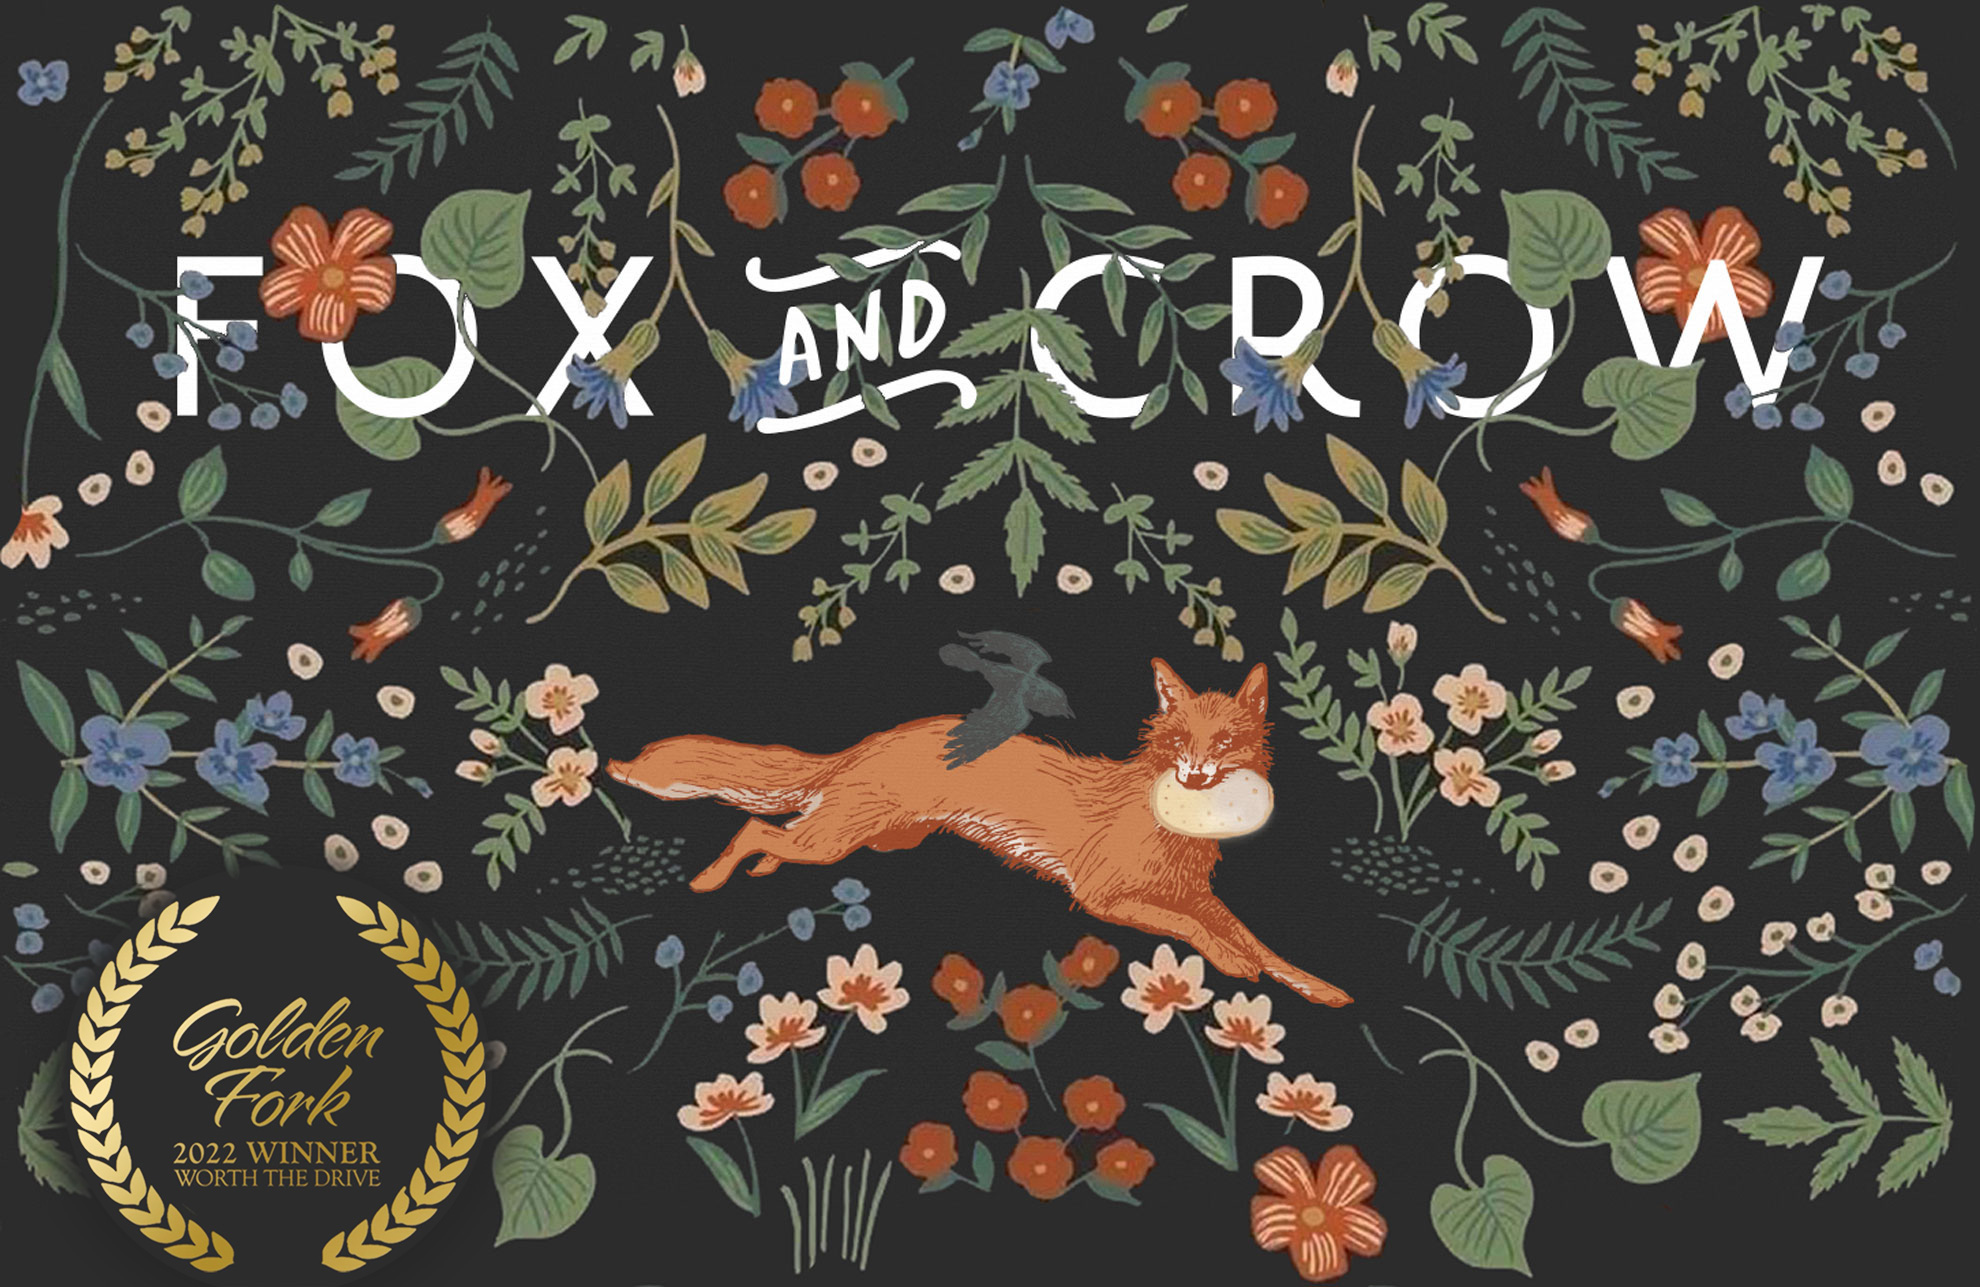 Art with Fox and Crow illustration on floral wallpaper - Fox Valley Golden Fork 2022 Award Winner